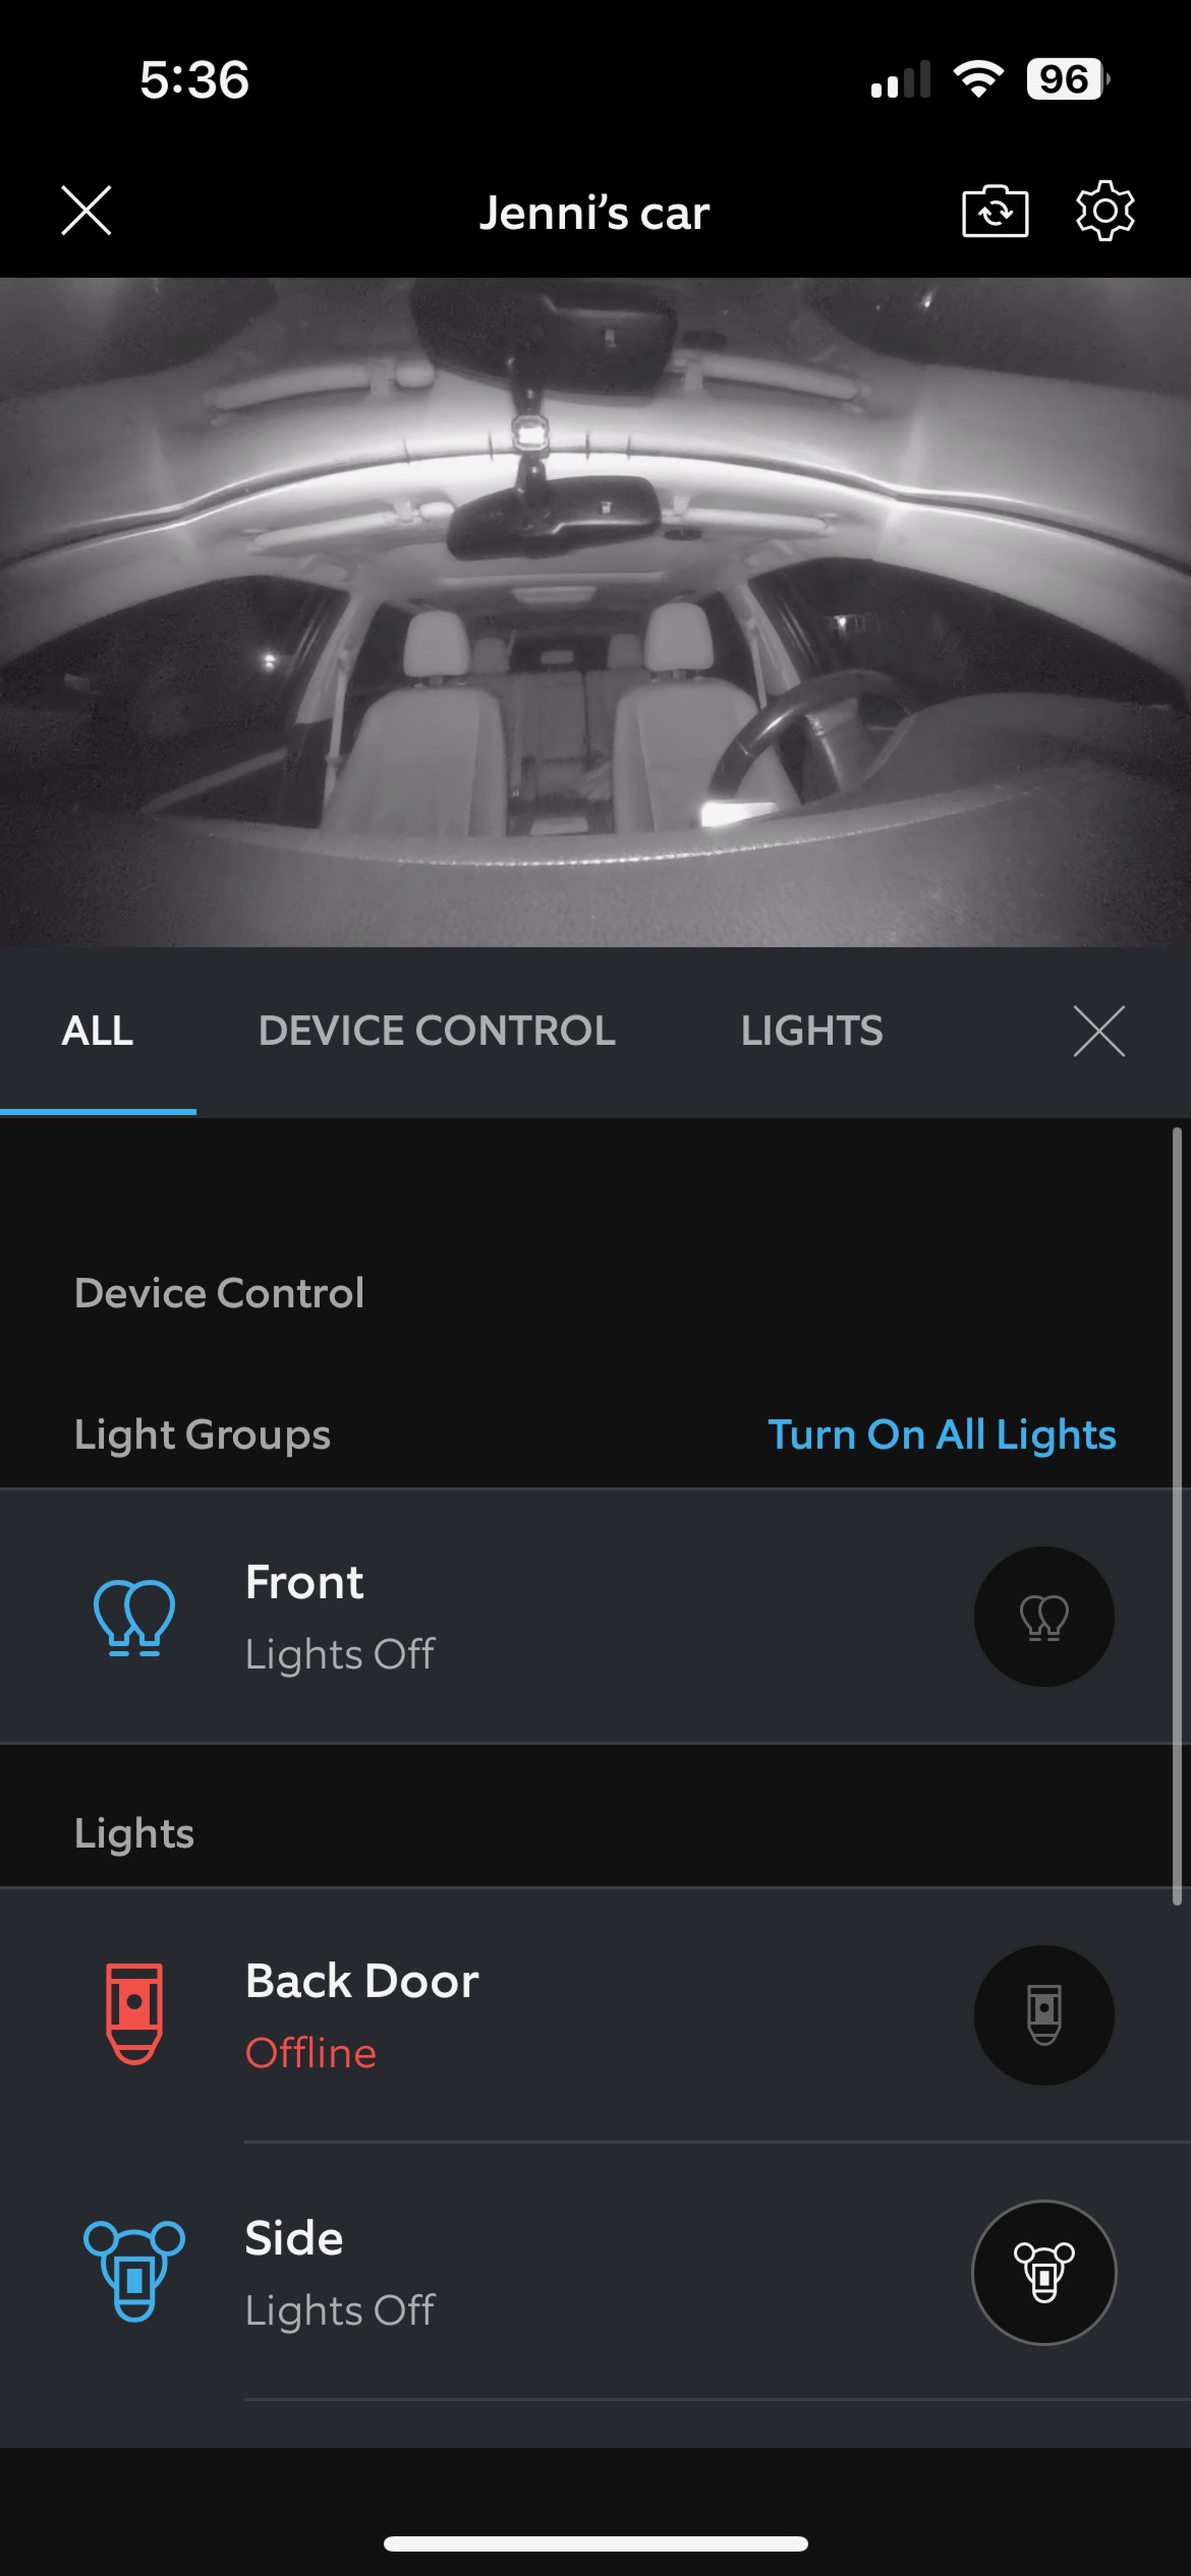 <em>You can control other Ring devices you have from the live view of the Car Cam in the app.</em>